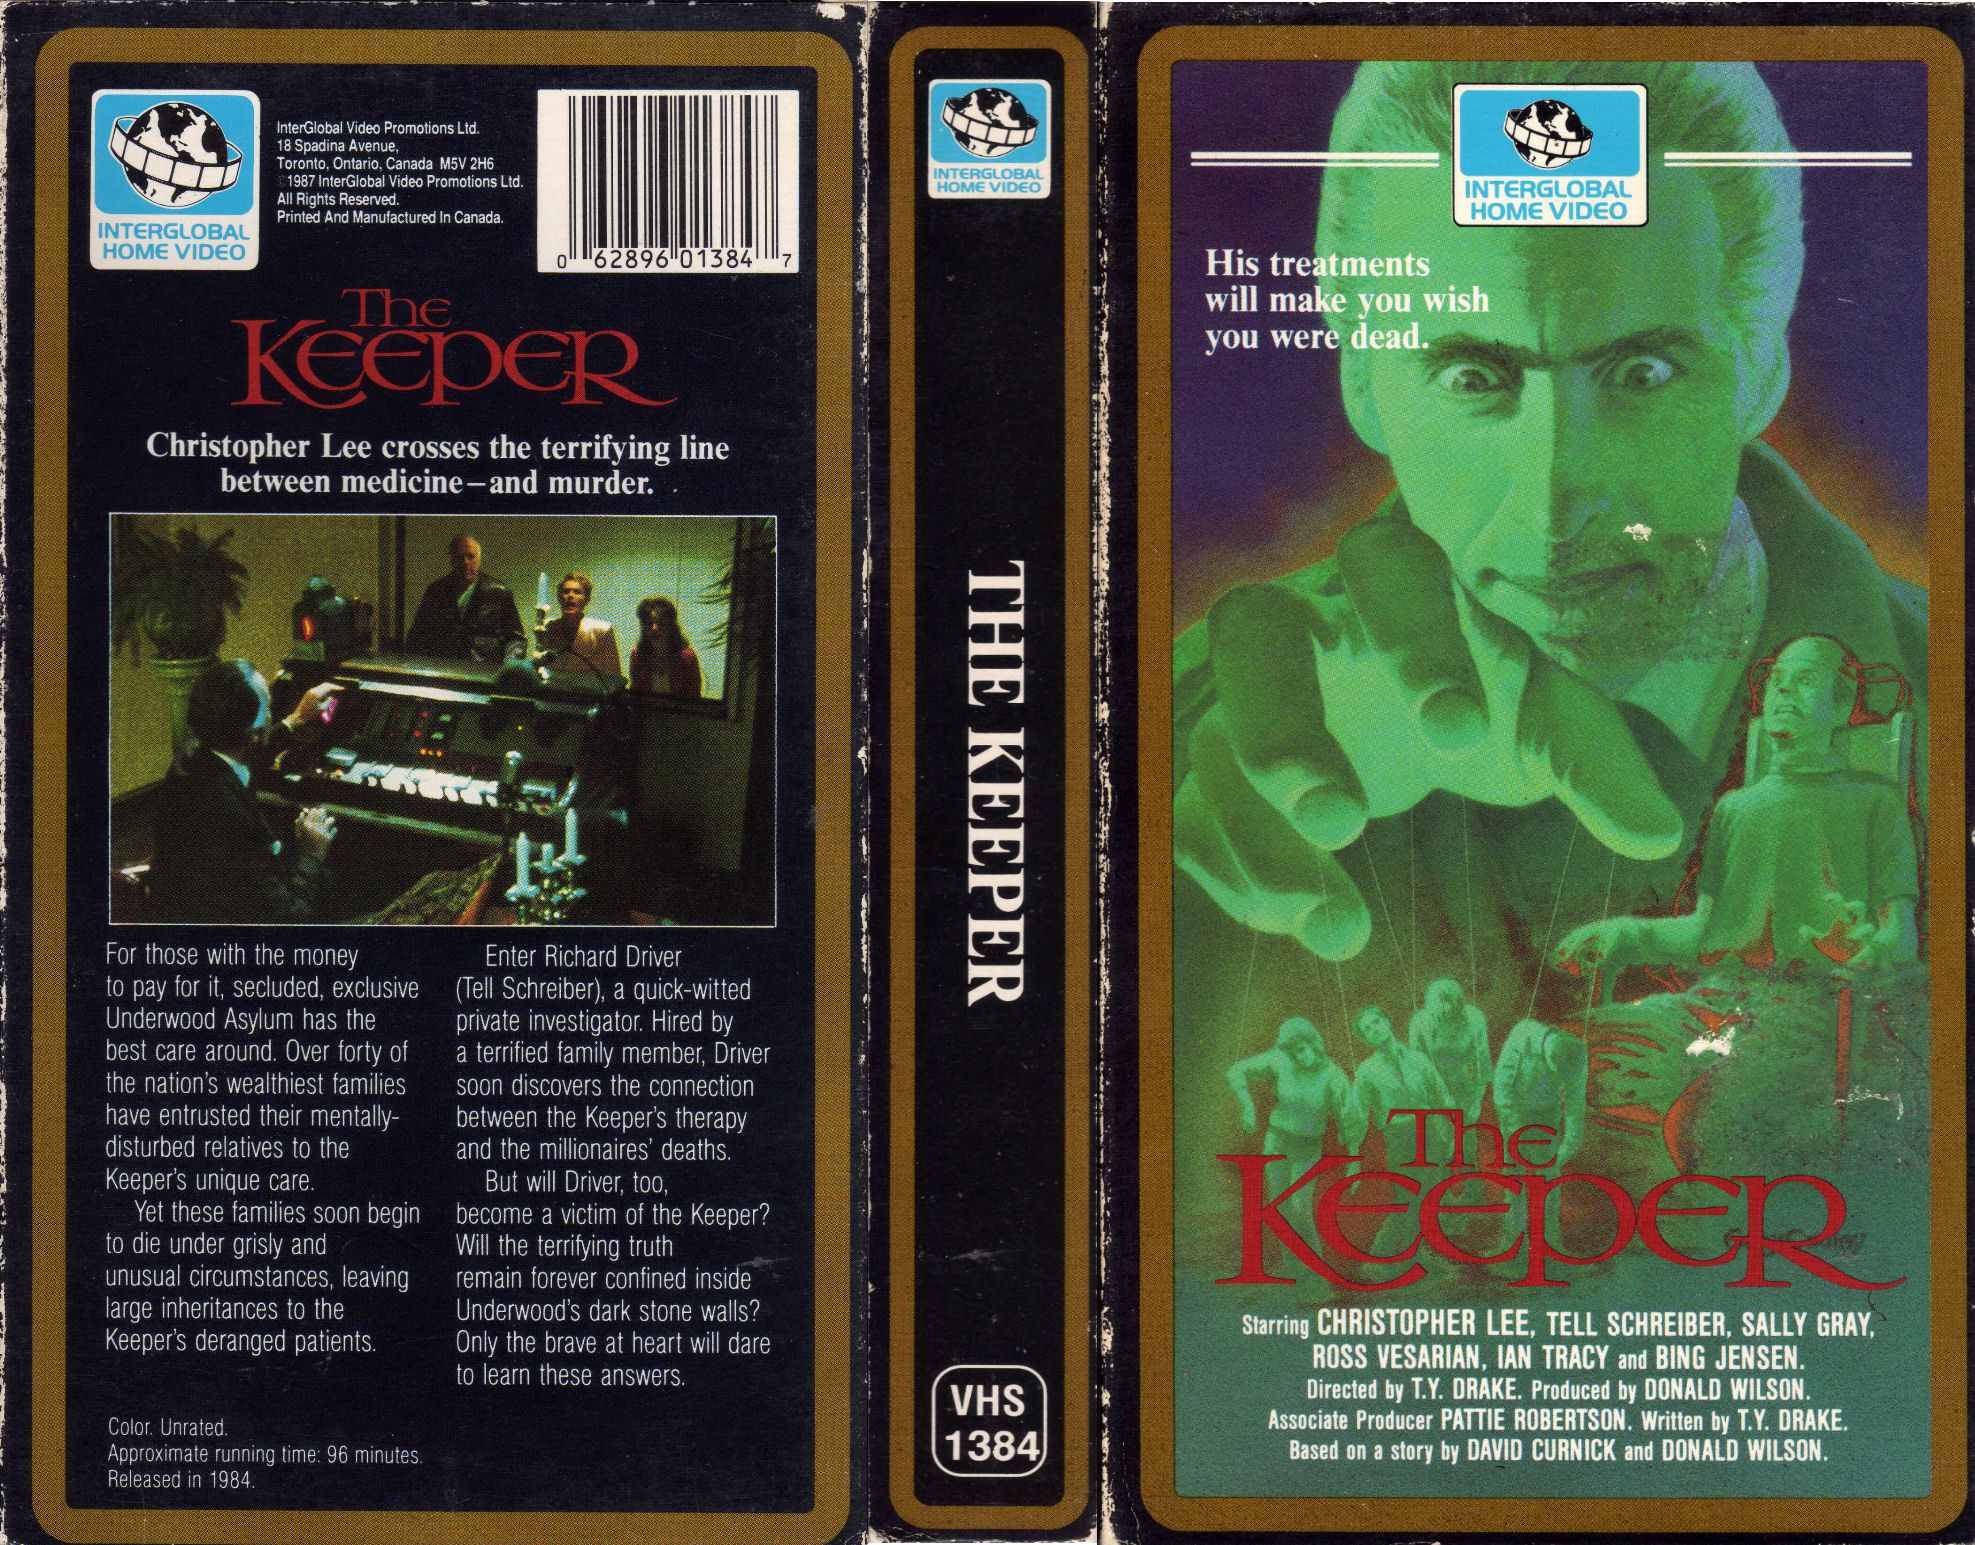 The Keeper (1976)